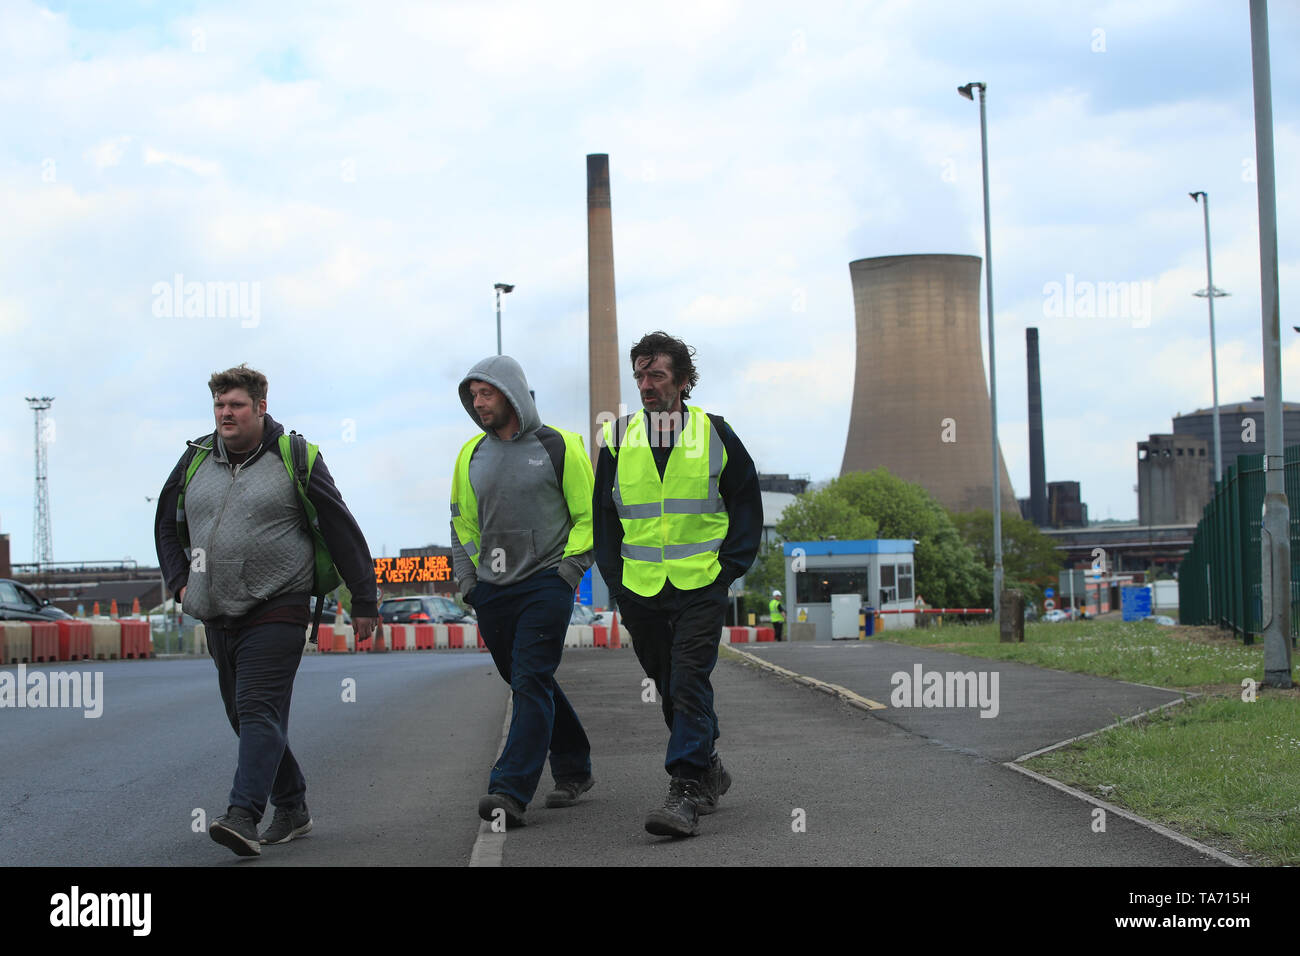 Workers leave the steelworks plant in Scunthorpe following a shift change as owner British Steel is to go into official recievership after failing to secure funds for its future. Stock Photo